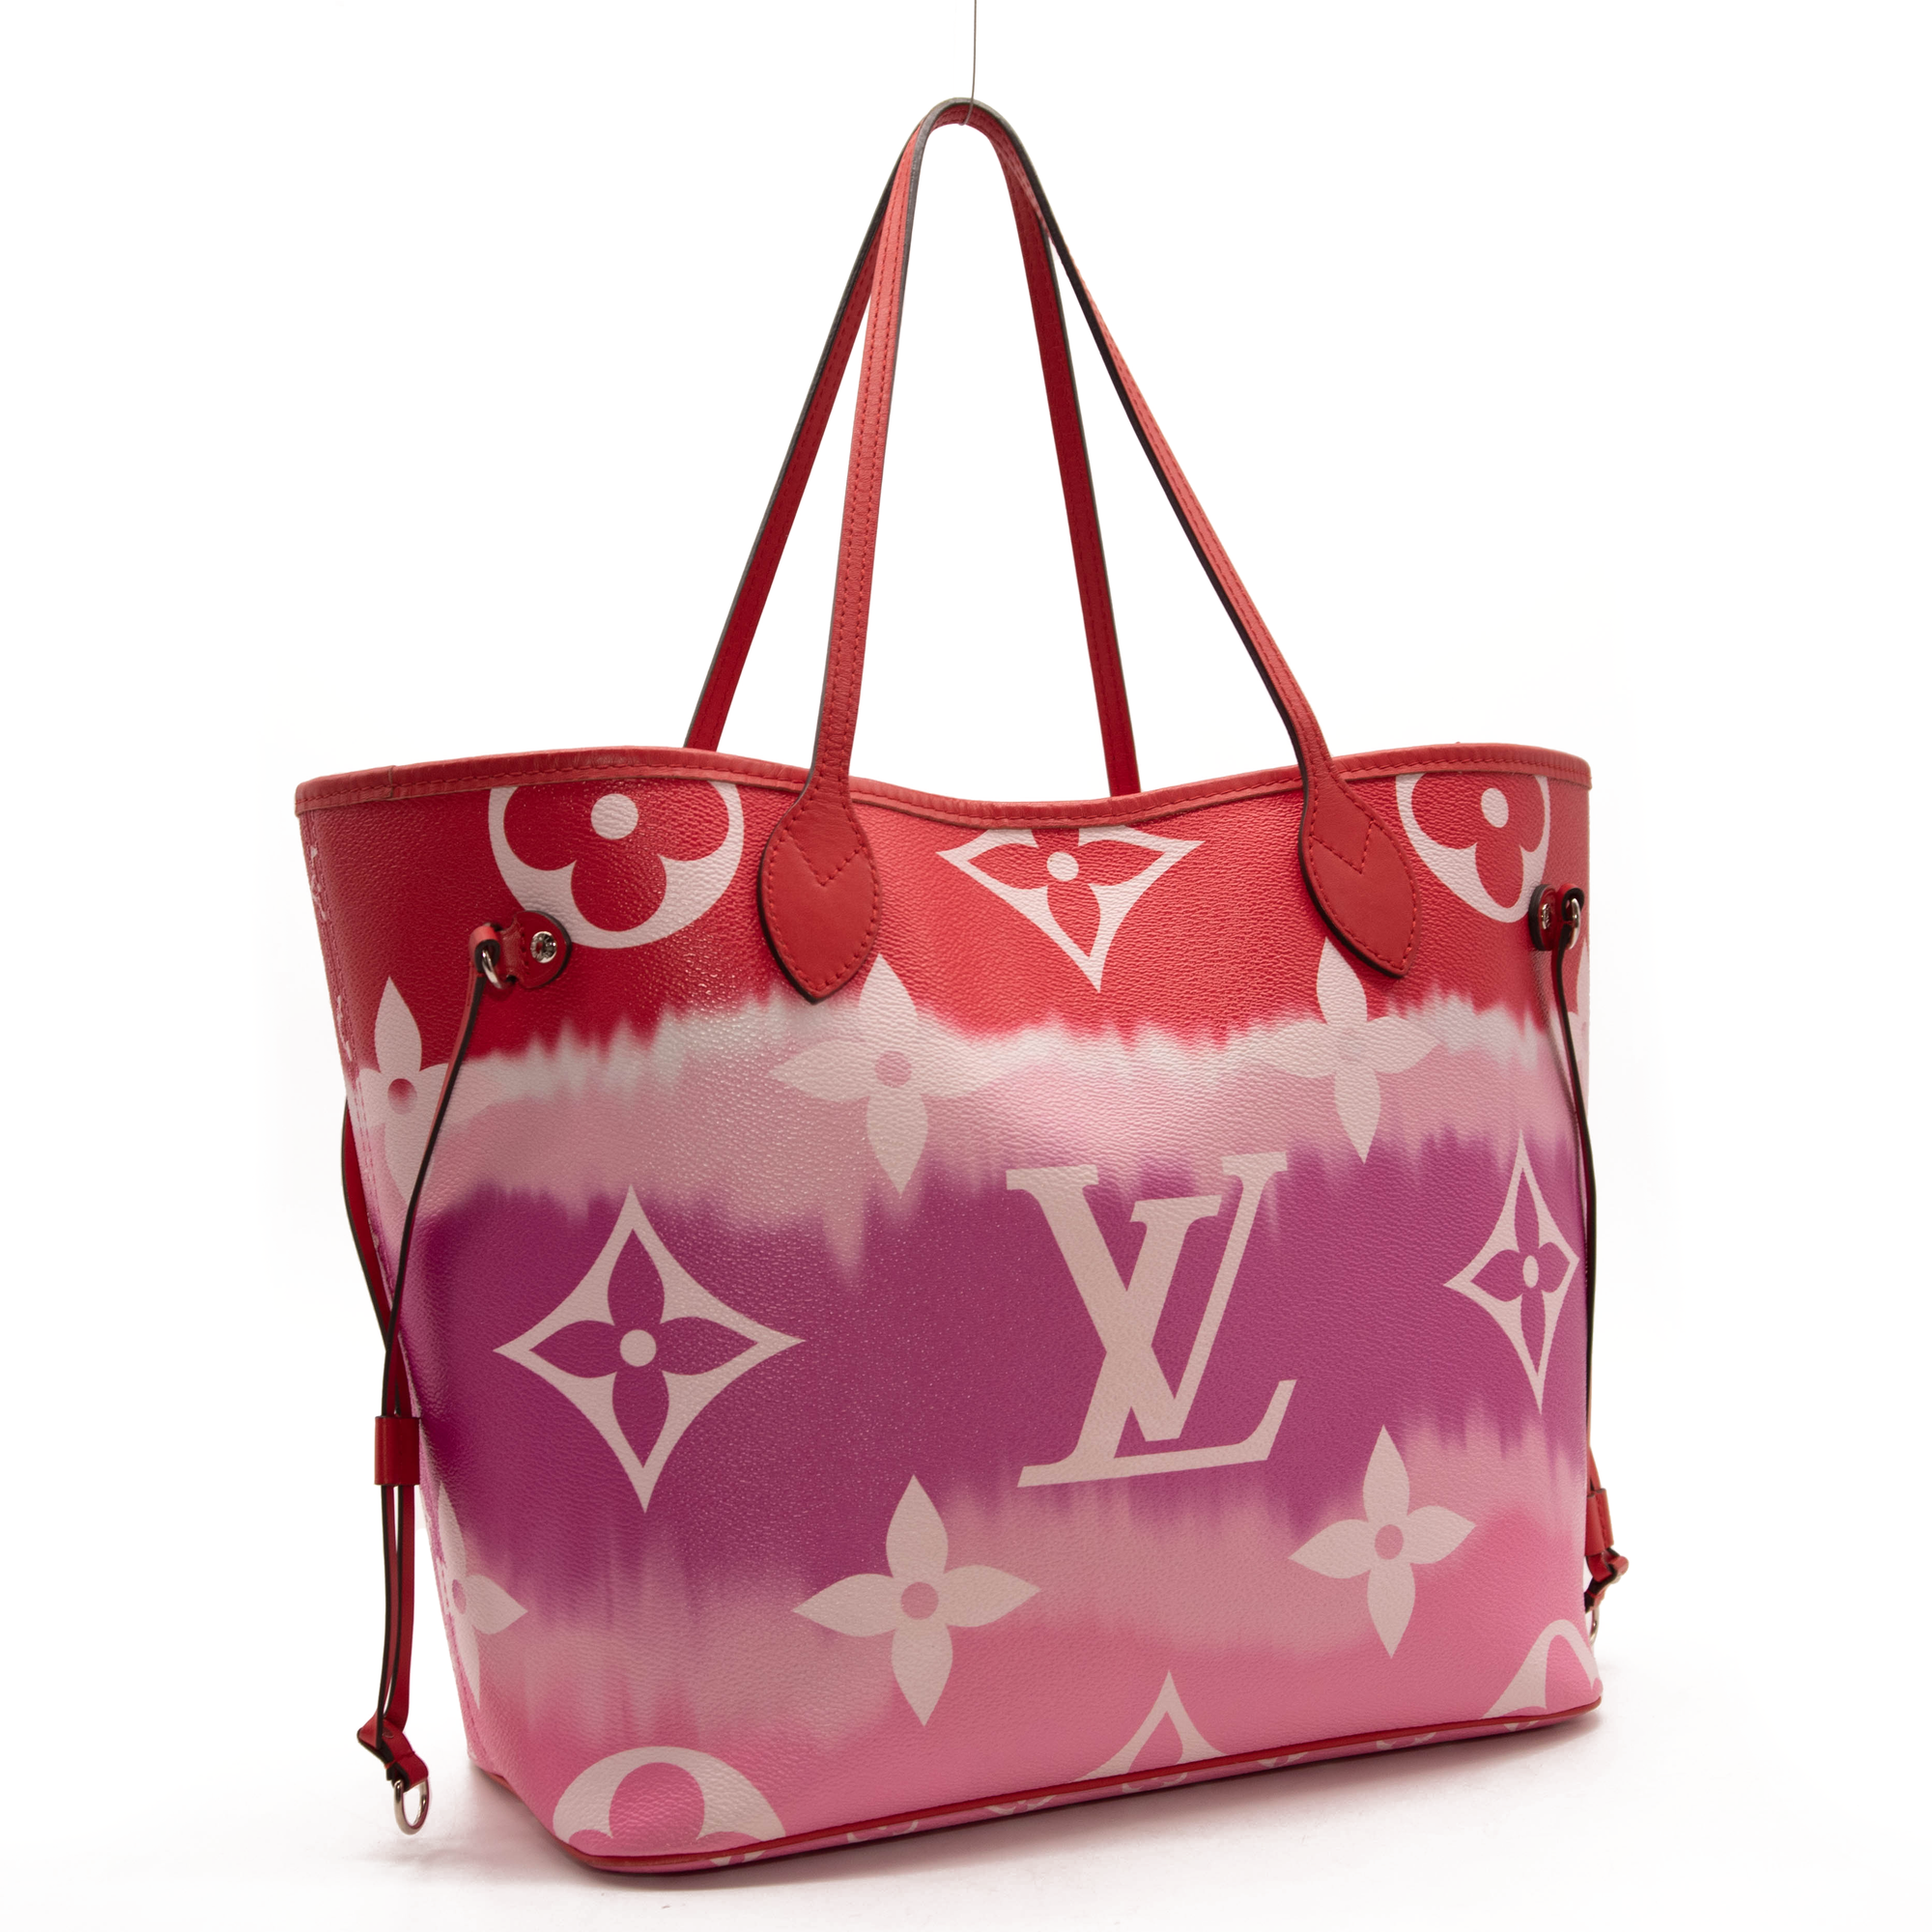 Louis Vuitton Neverfull The Tote That is Truly Never Full  Handbags   Accessories  Sothebys